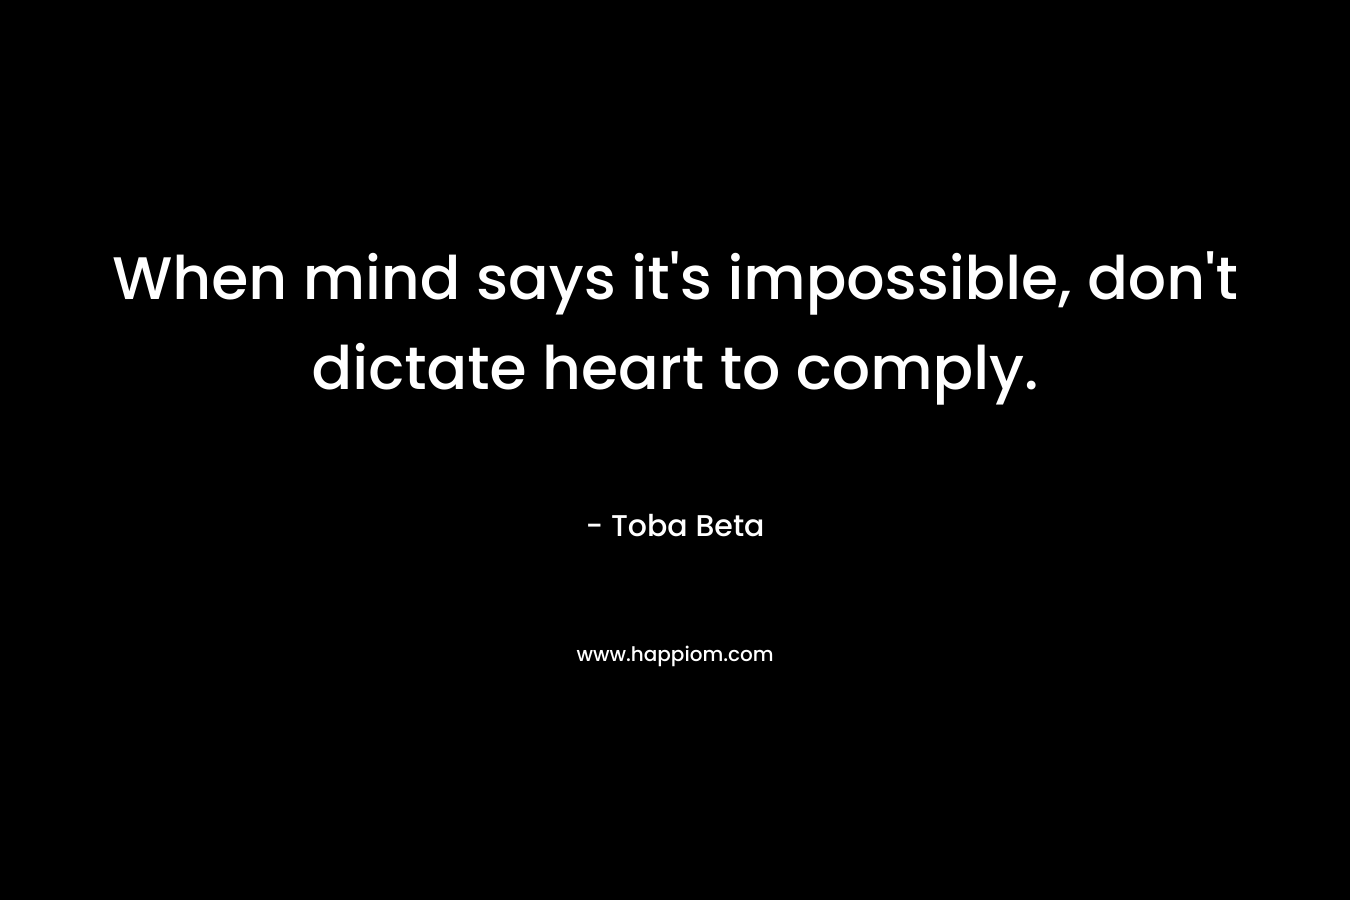 When mind says it's impossible, don't dictate heart to comply.